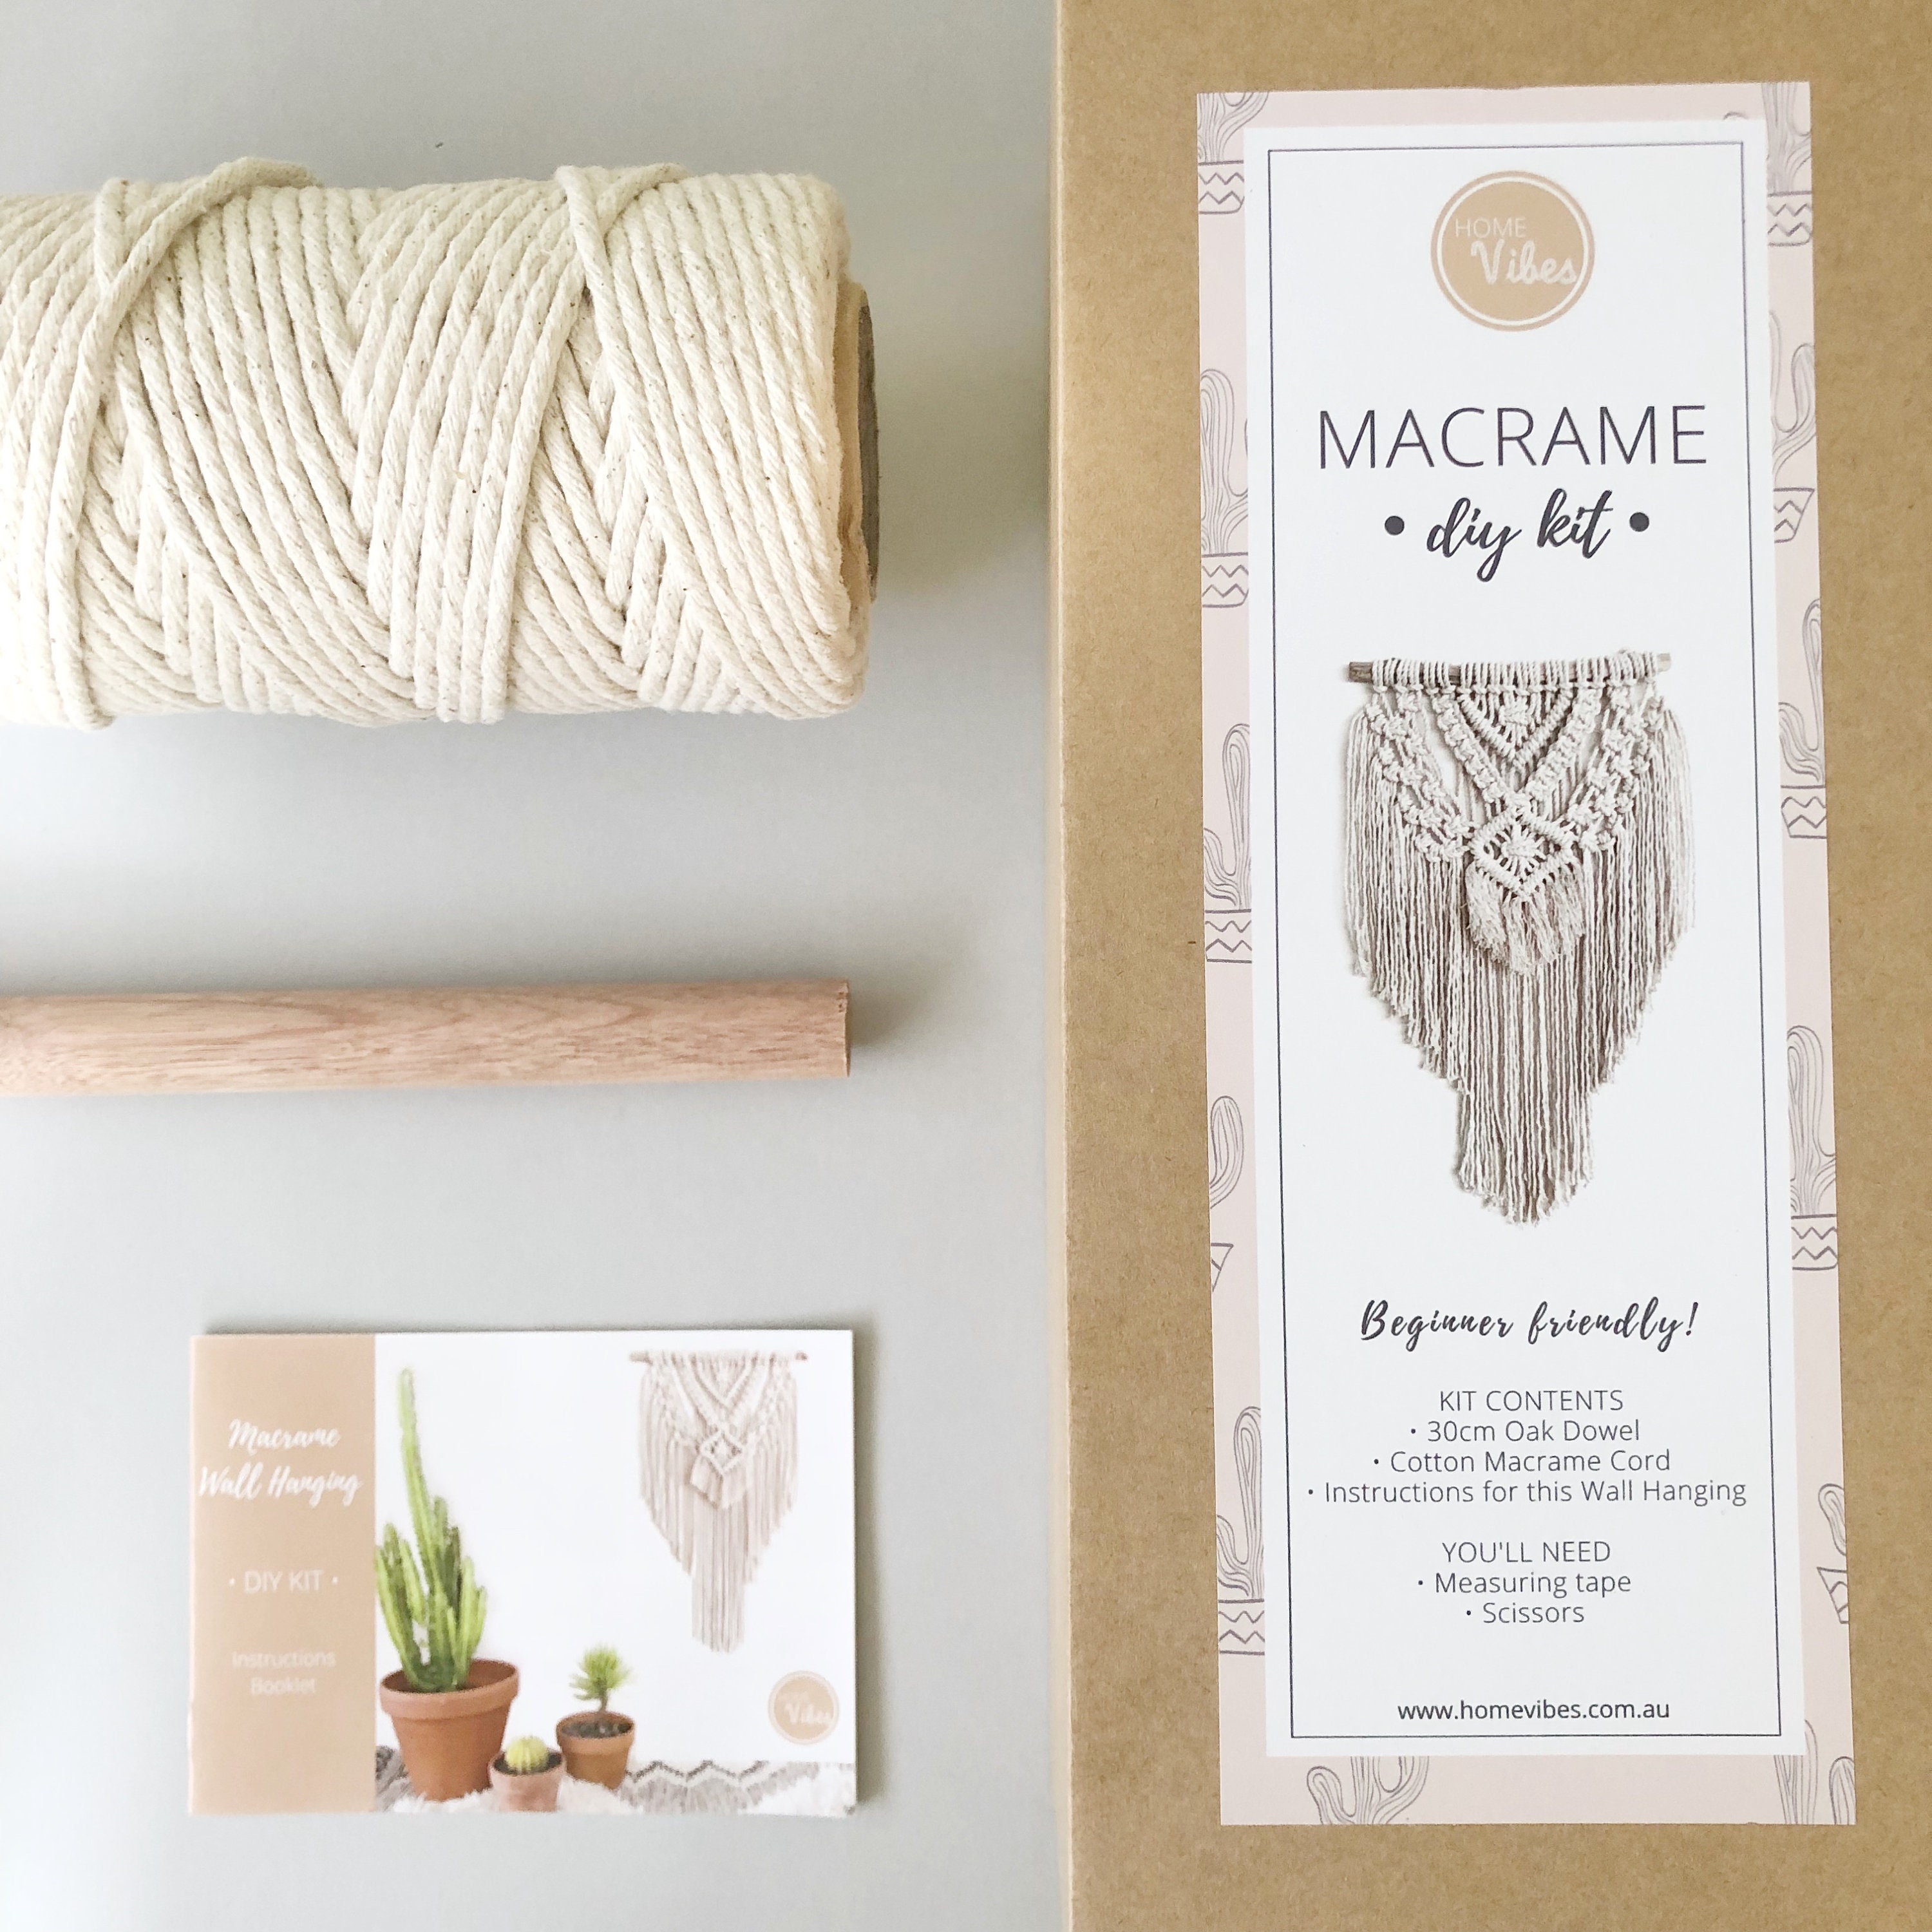 Macrame Cotton Rope Weaving with Wood Needle Crochet Kits for